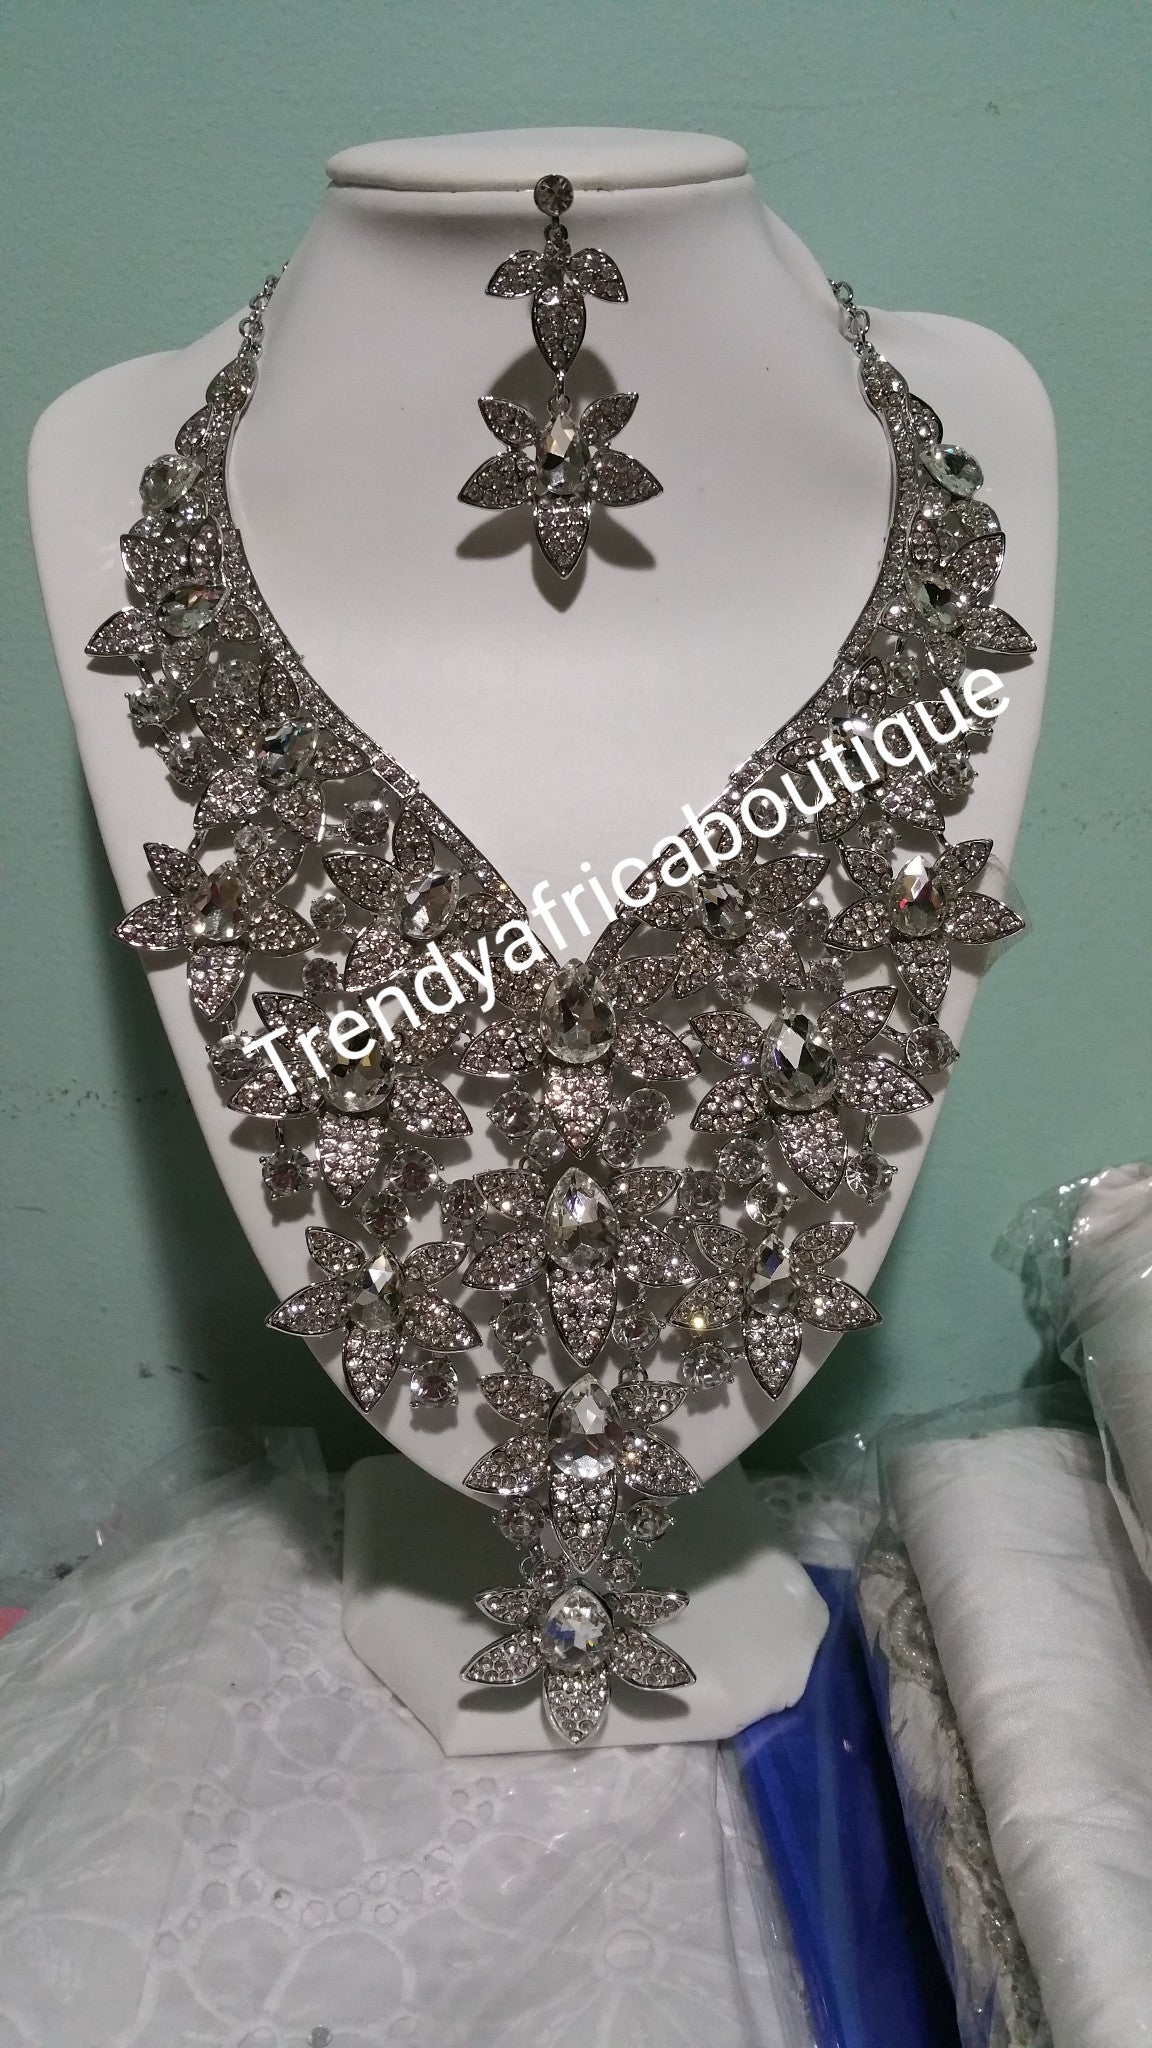 Sale: Silver Crystal jewelry set. 2pc set of Bridal dazzling crystal necklace for weddings or formal occasion. Sold as a set